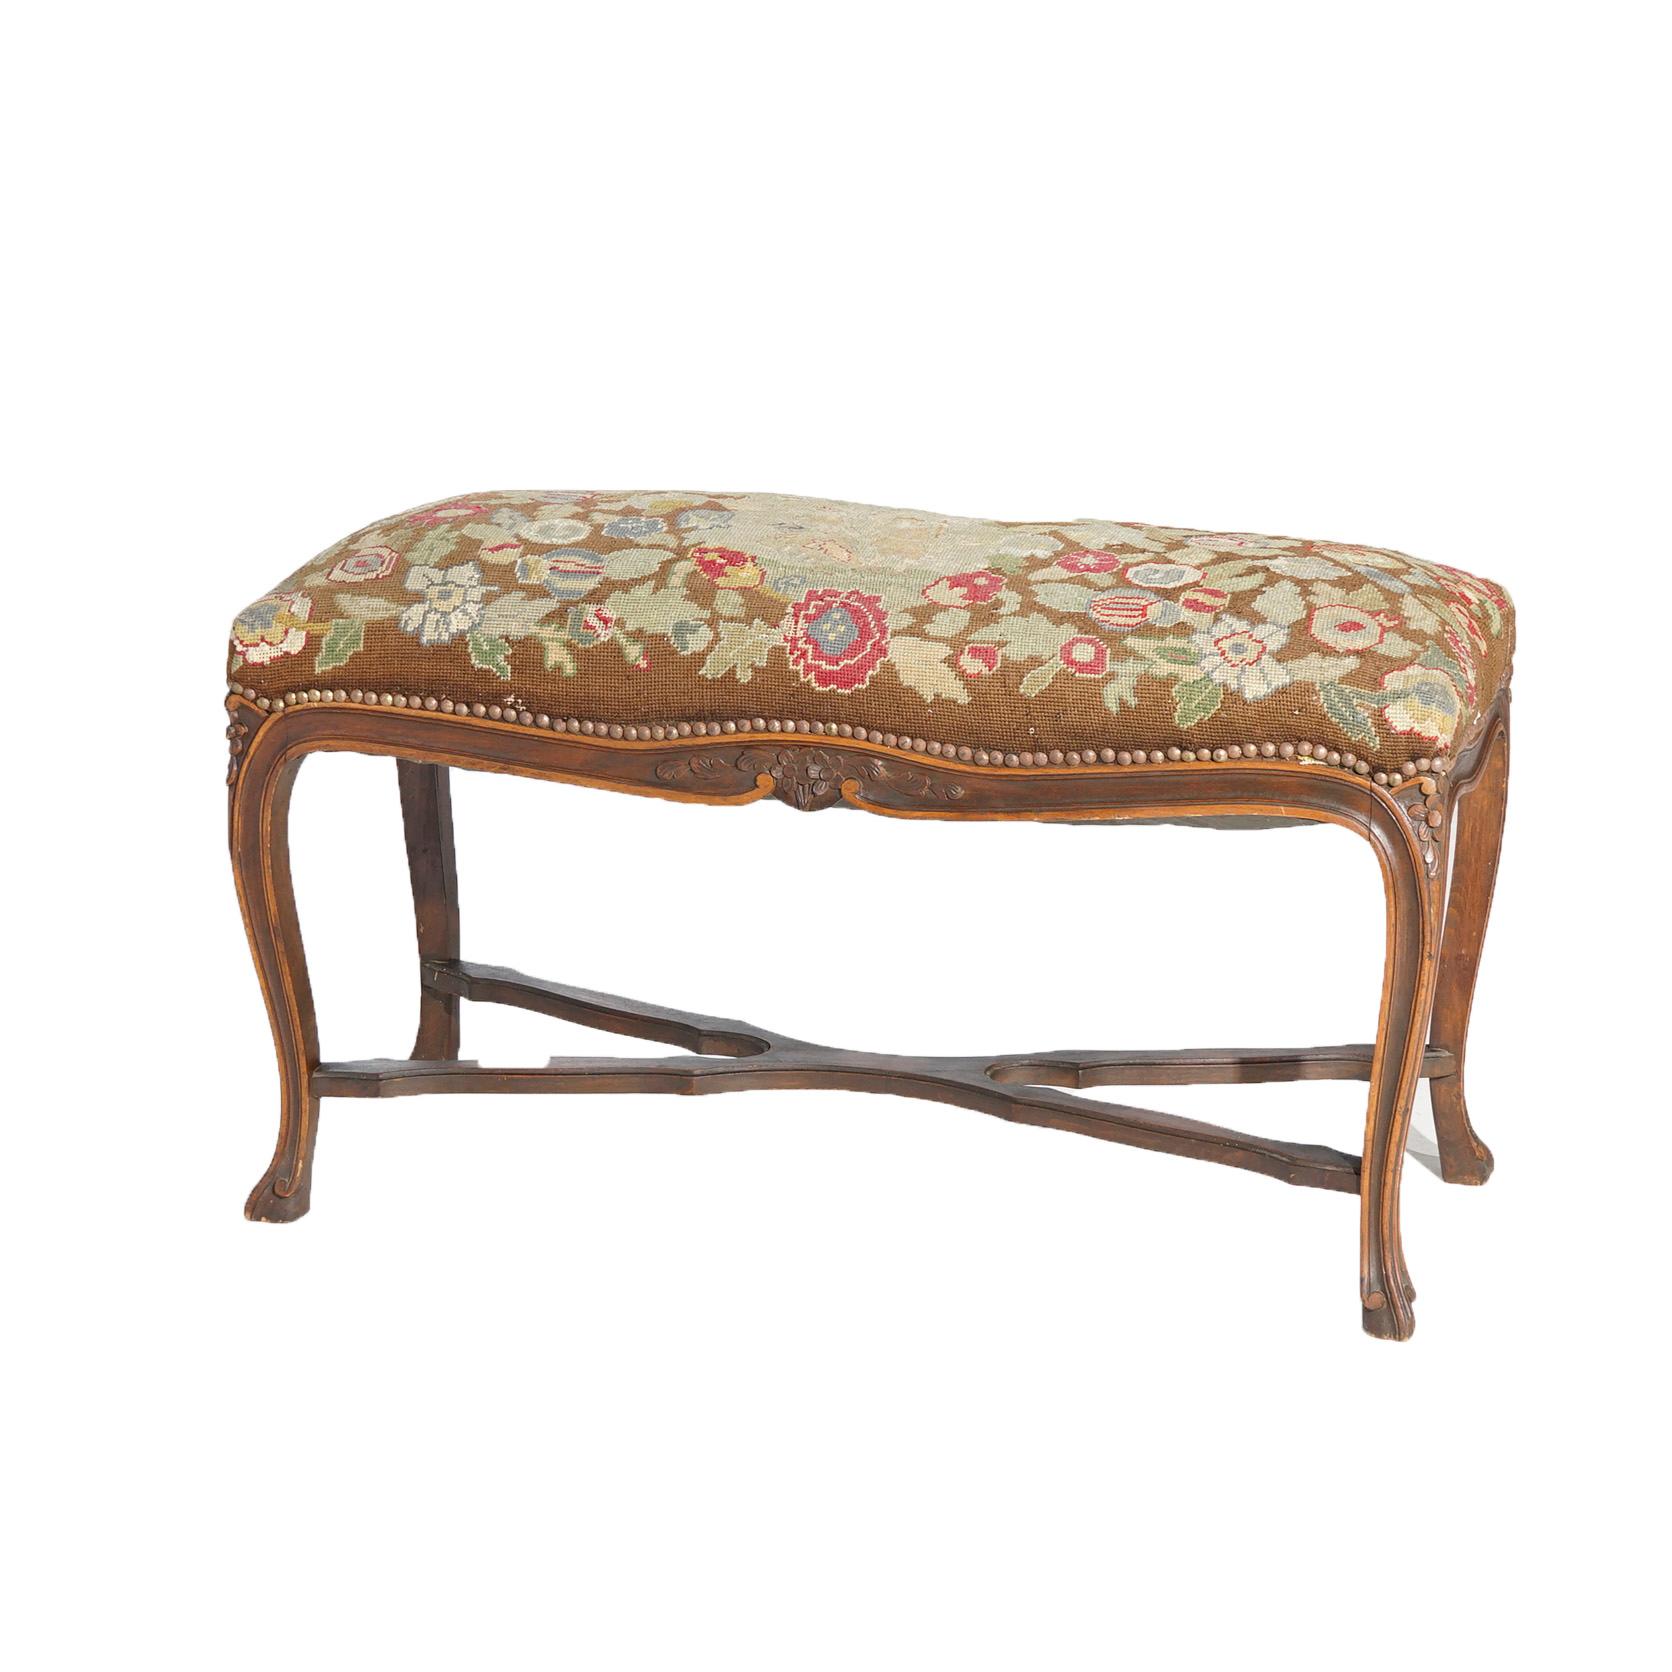 An antique French Louis XV style long bench offers floral tapestry seat with central reserve with courting scene, over carved walnut base having foliate and floral elements and raised on cabriole legs, c1920

Measures- 21.5''H x 37.5''W x 15.25''D.